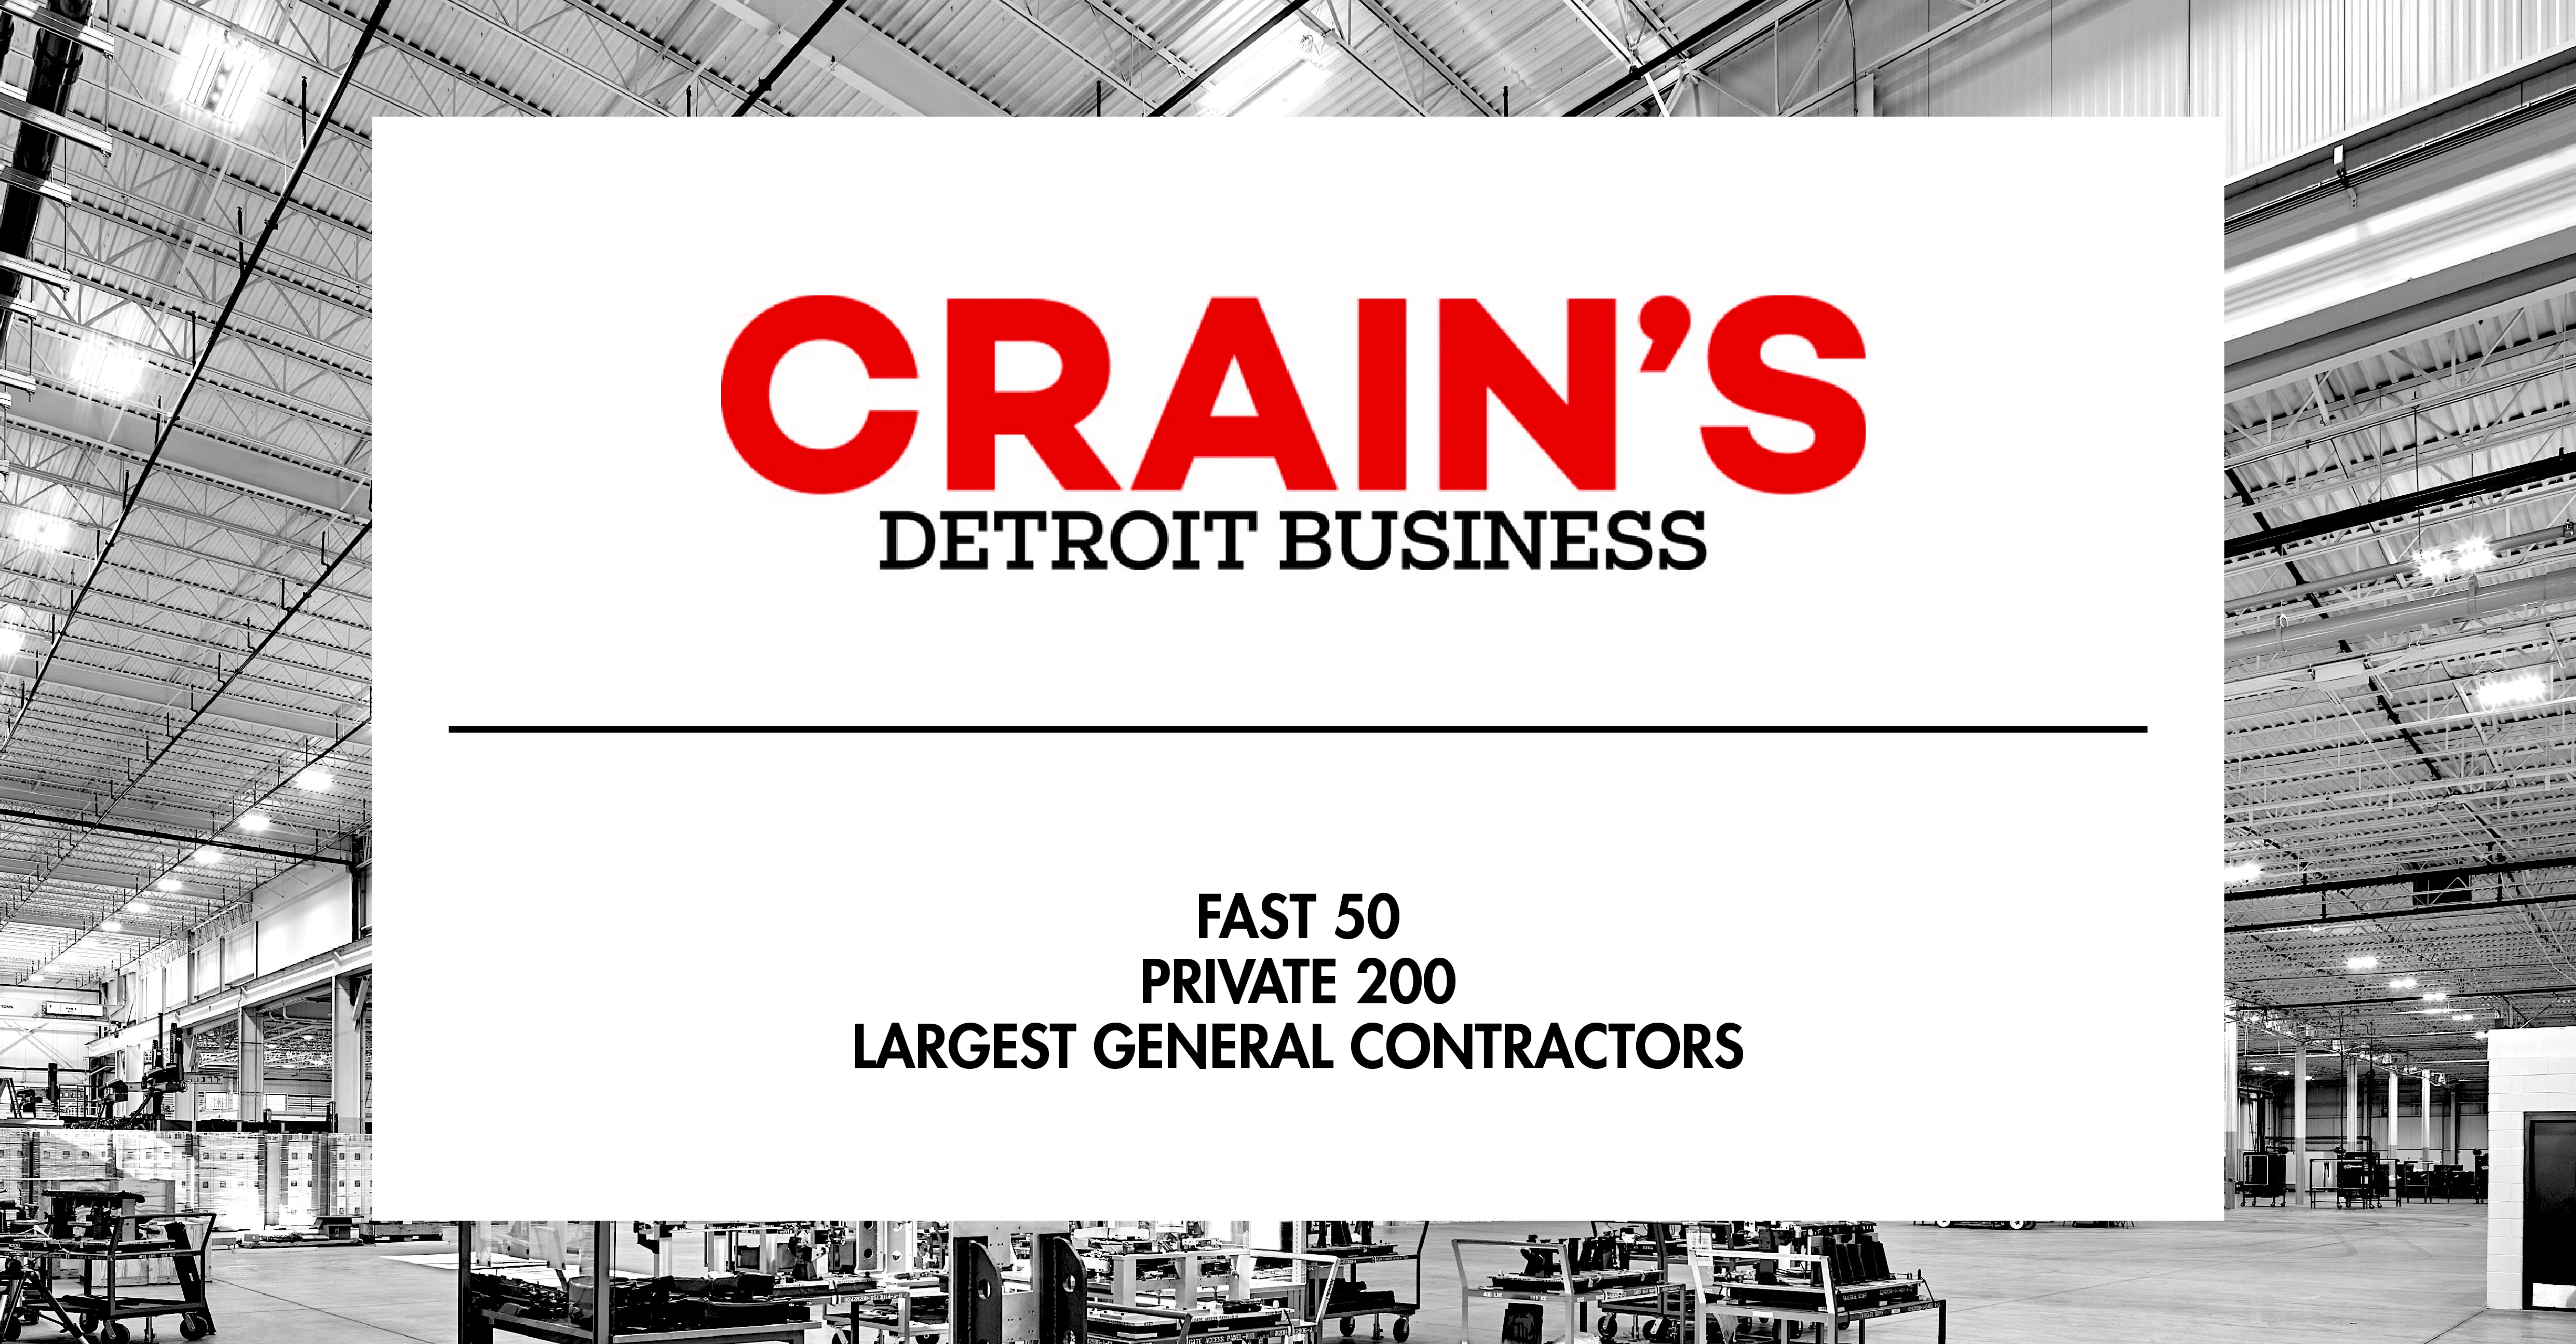 KIRCO MANIX Receives Multiple Recognitions in Crain’s Detroit Business’ 2021 Book of Lists